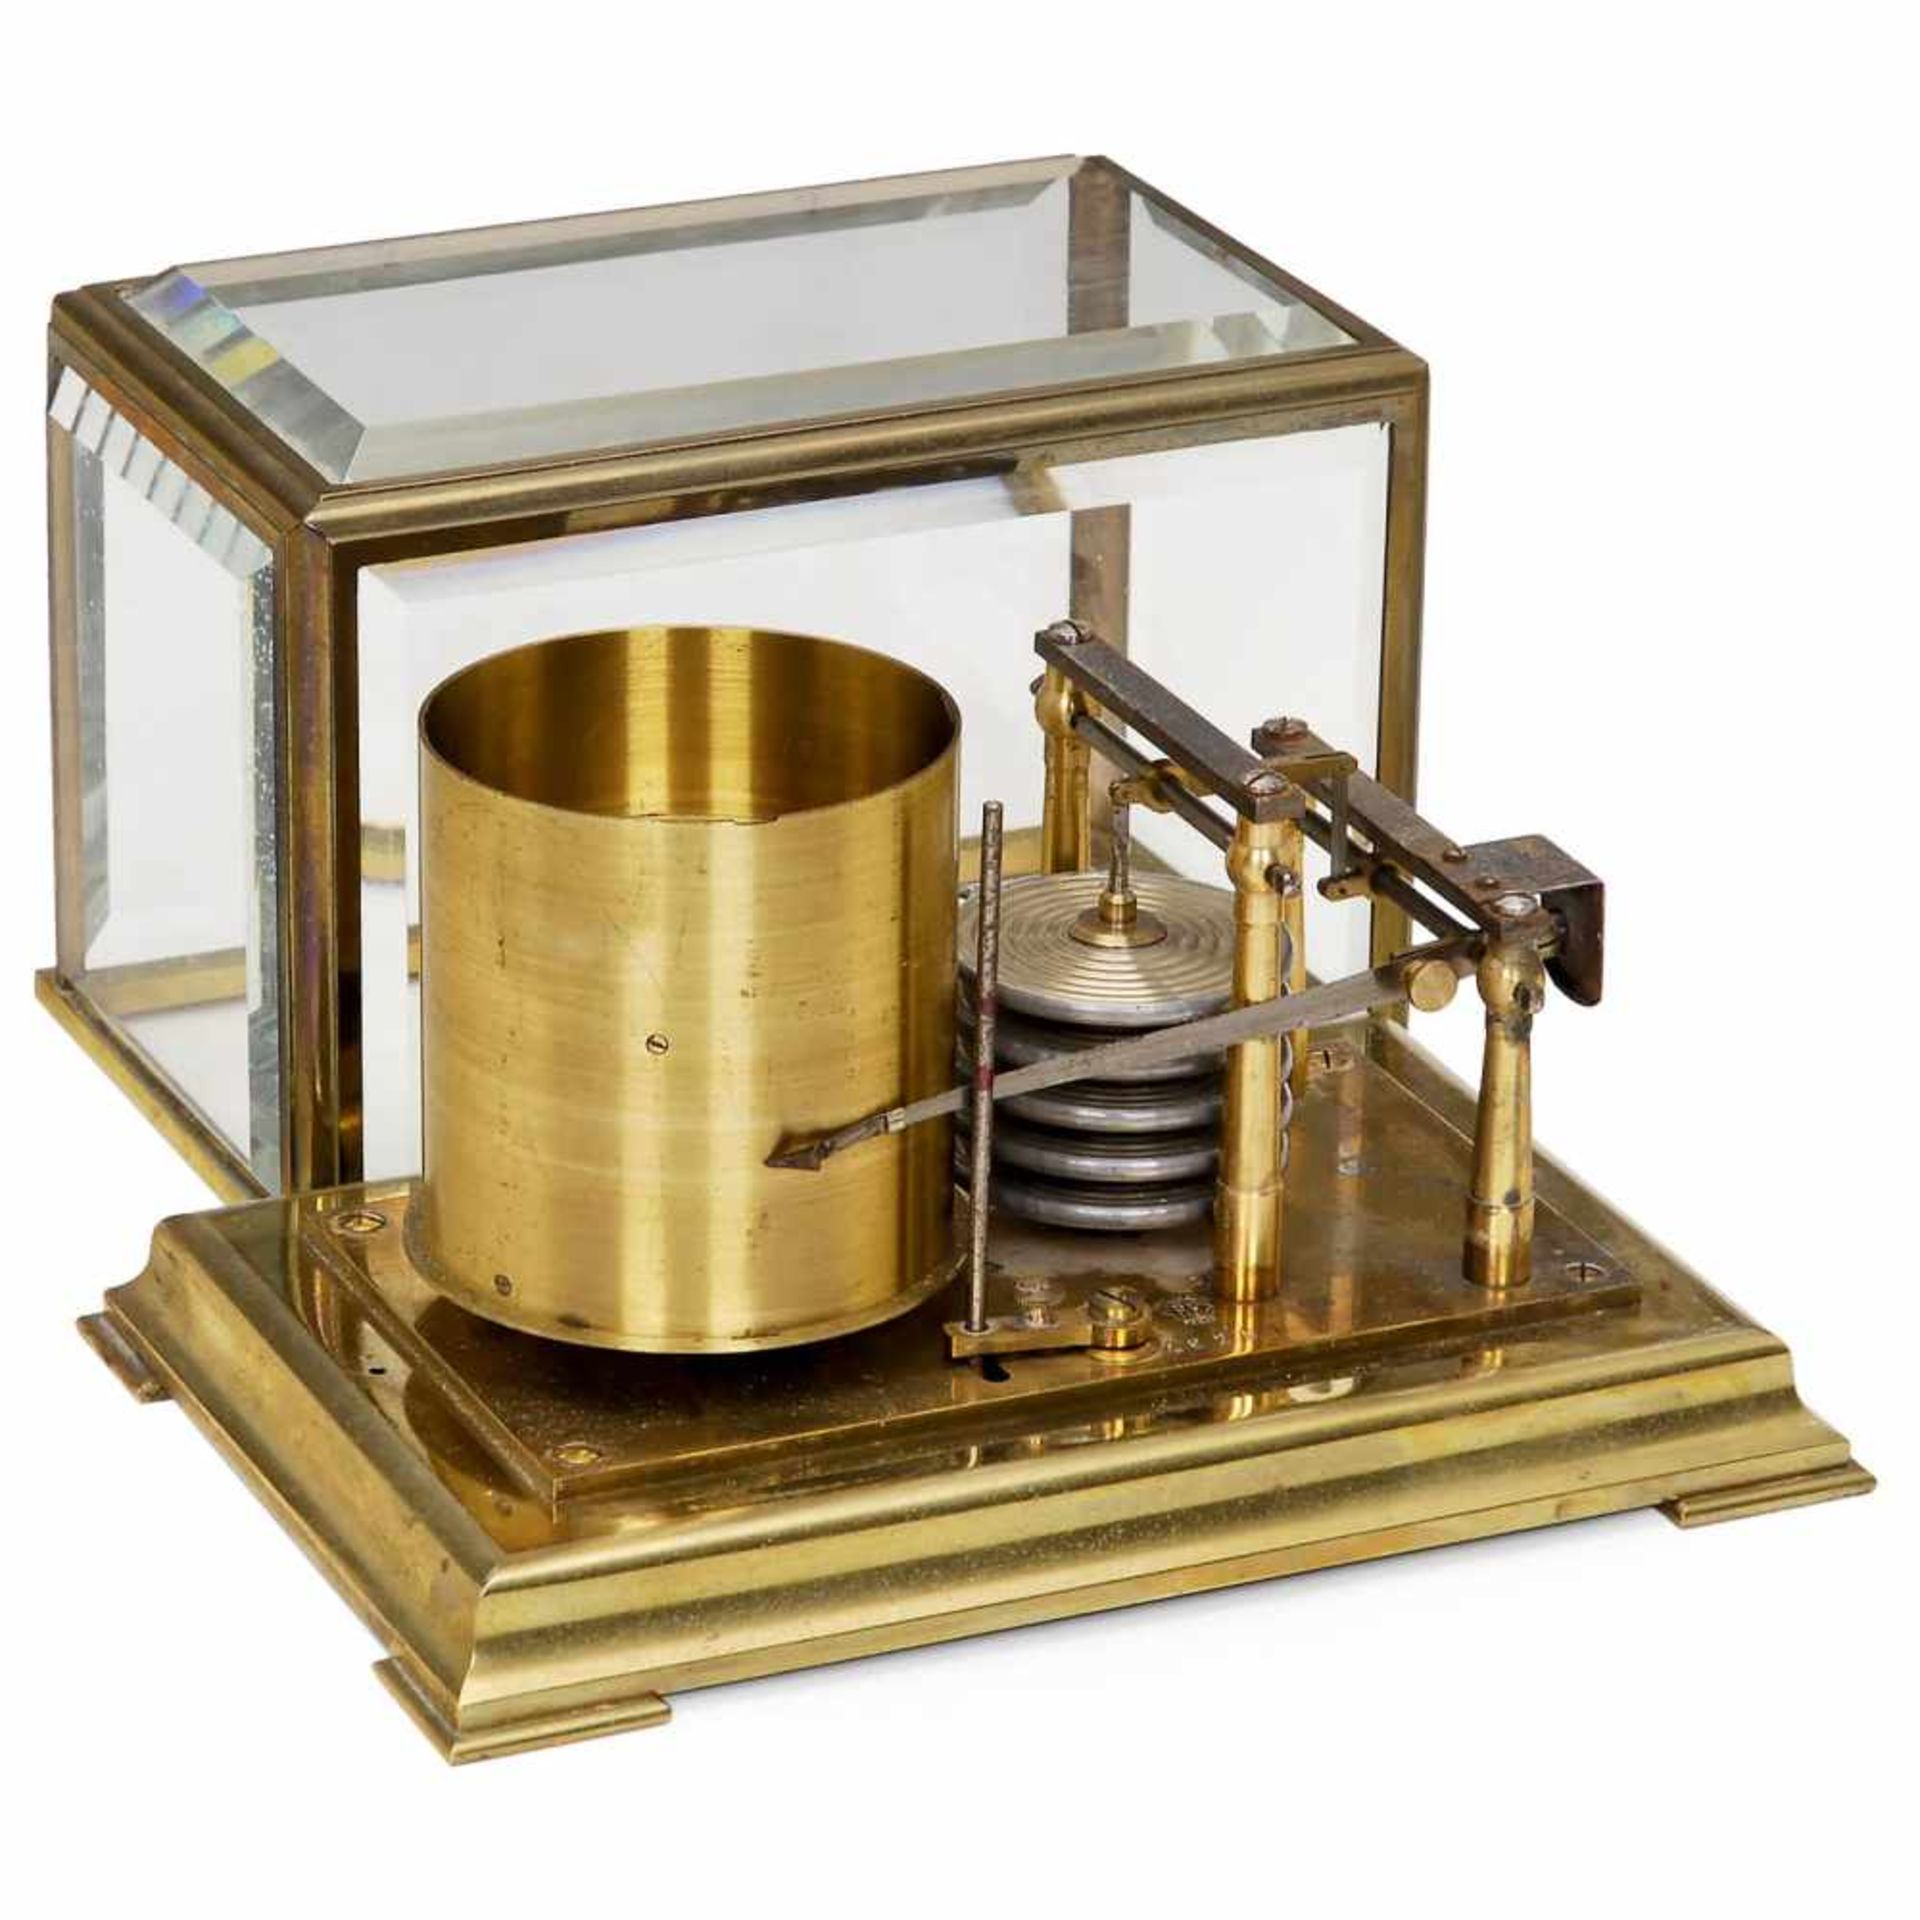 French Gilt Brass Barograph by Richard Frères, c. 1895Base plate stamped with "Richard Frères